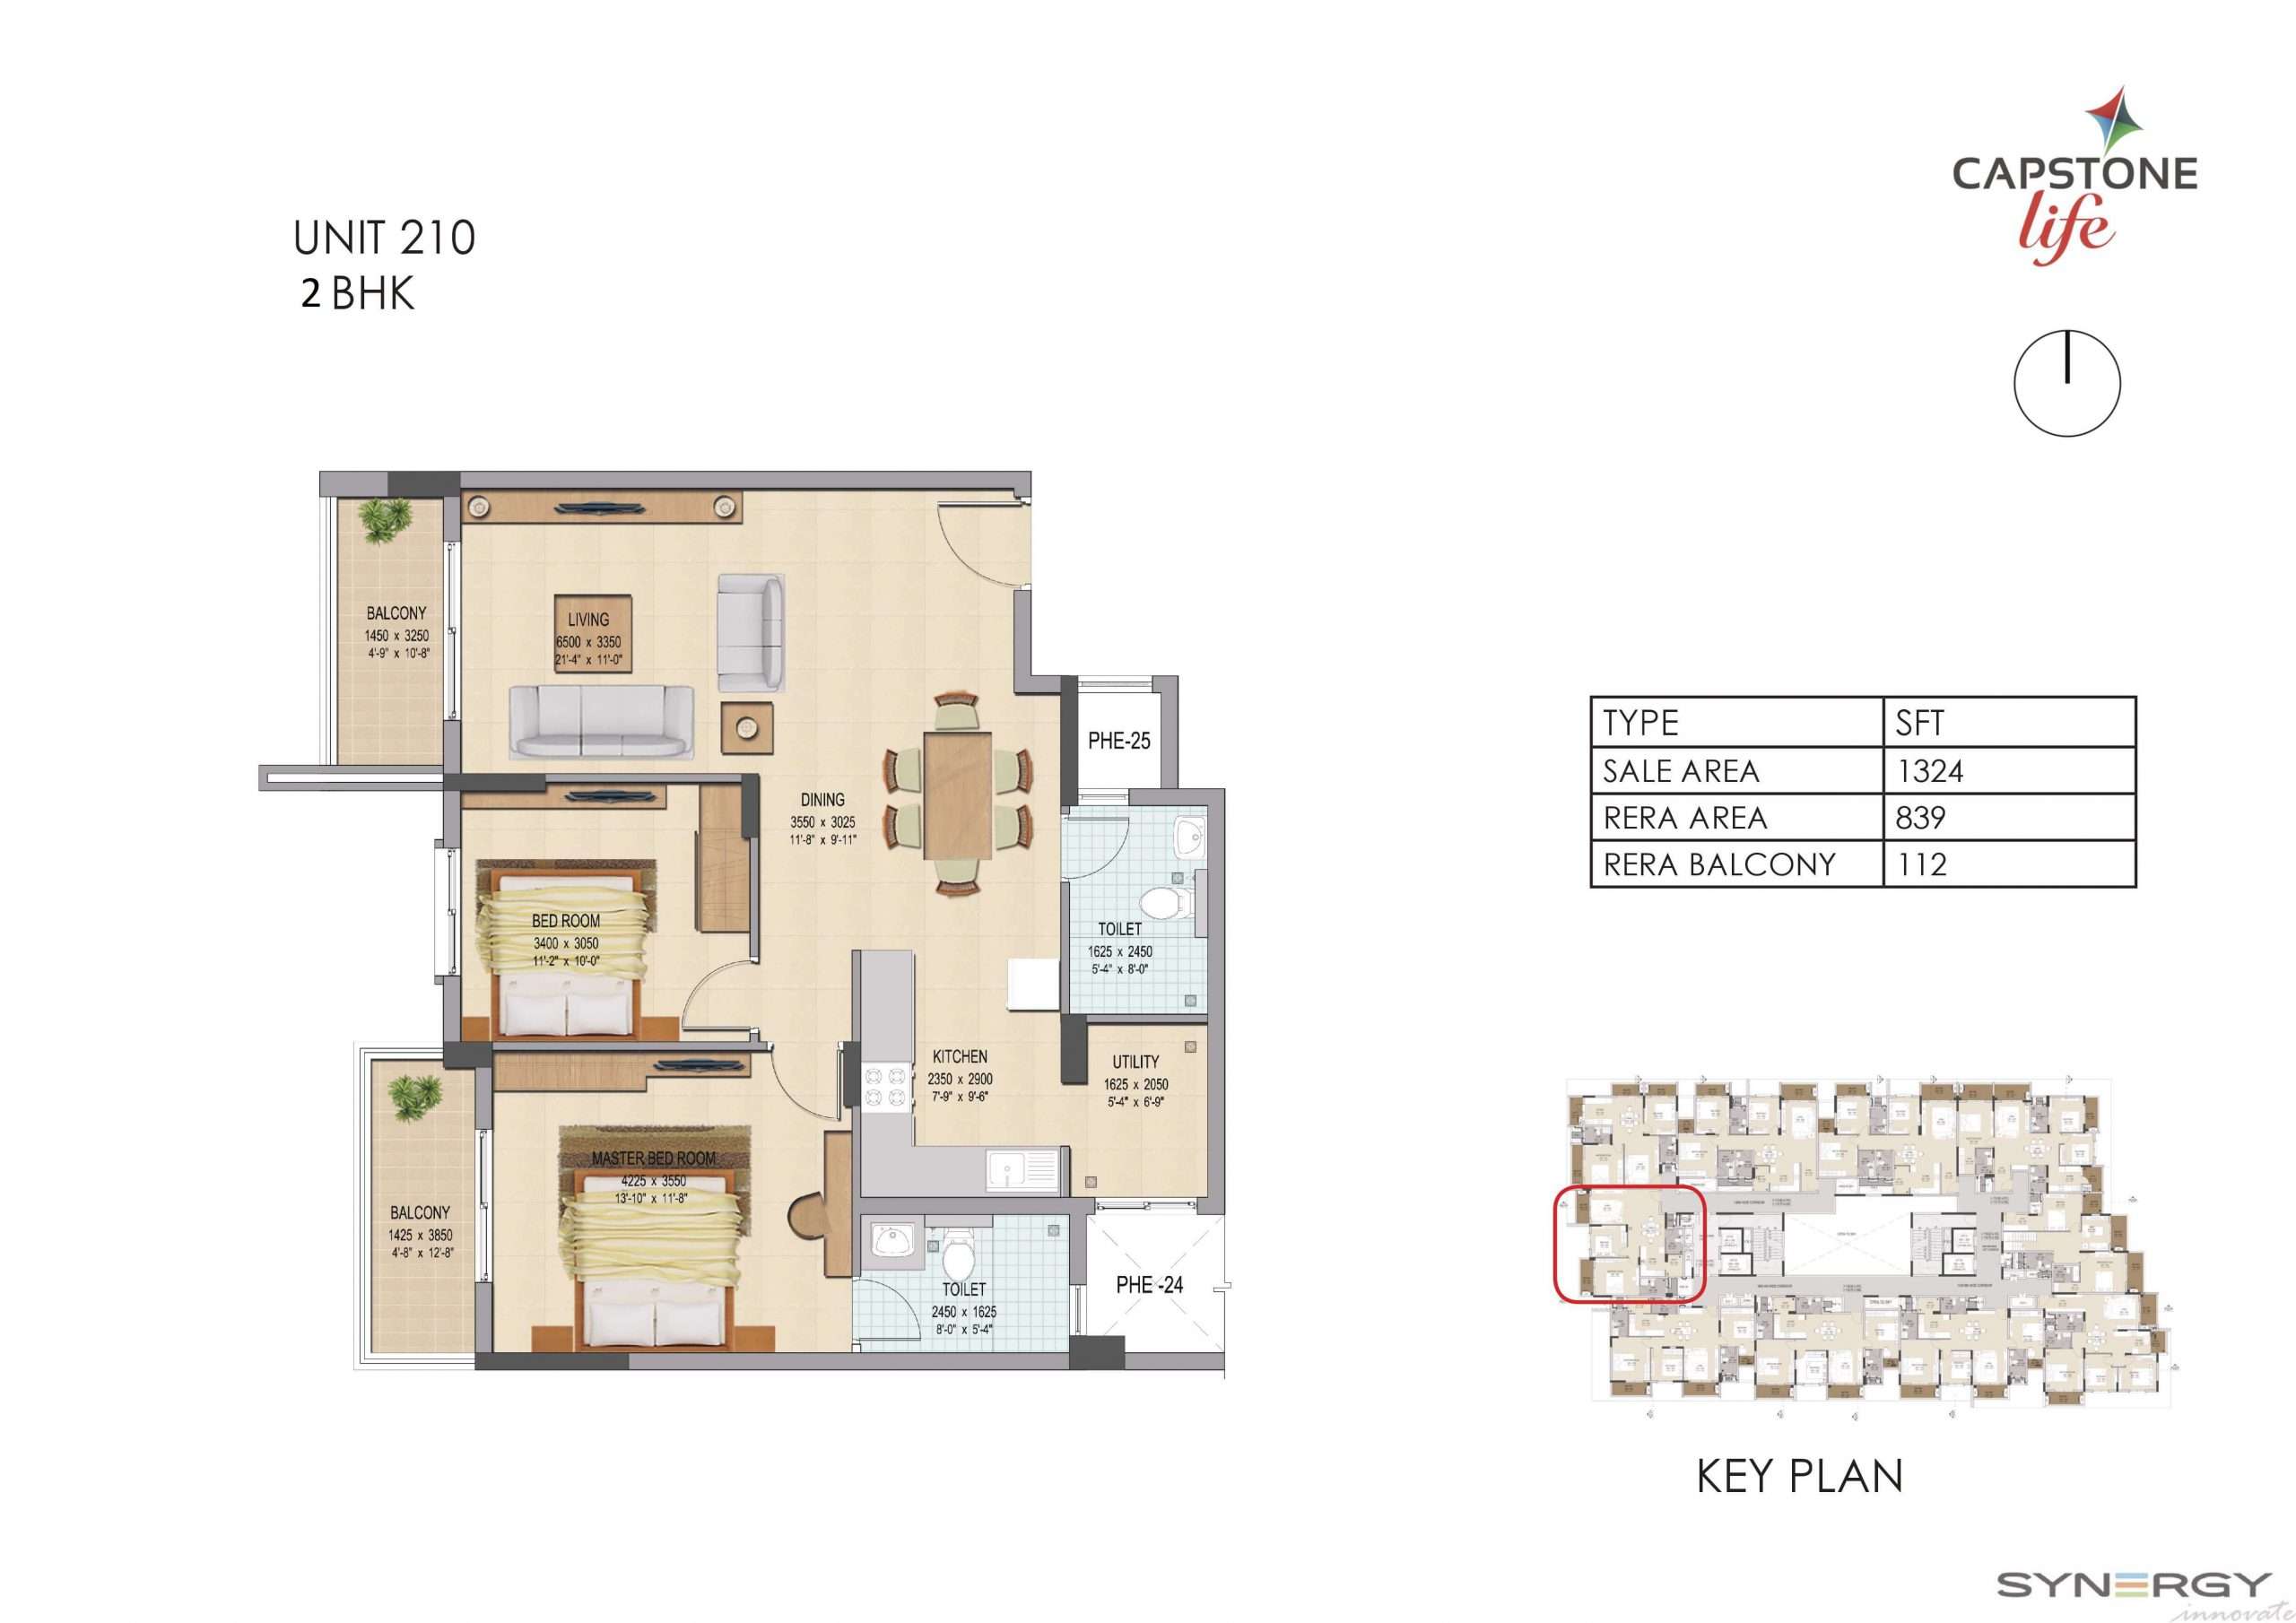 2 BHK 1324 Sq. Ft. Apartment in Capstone Life Flowing Tree